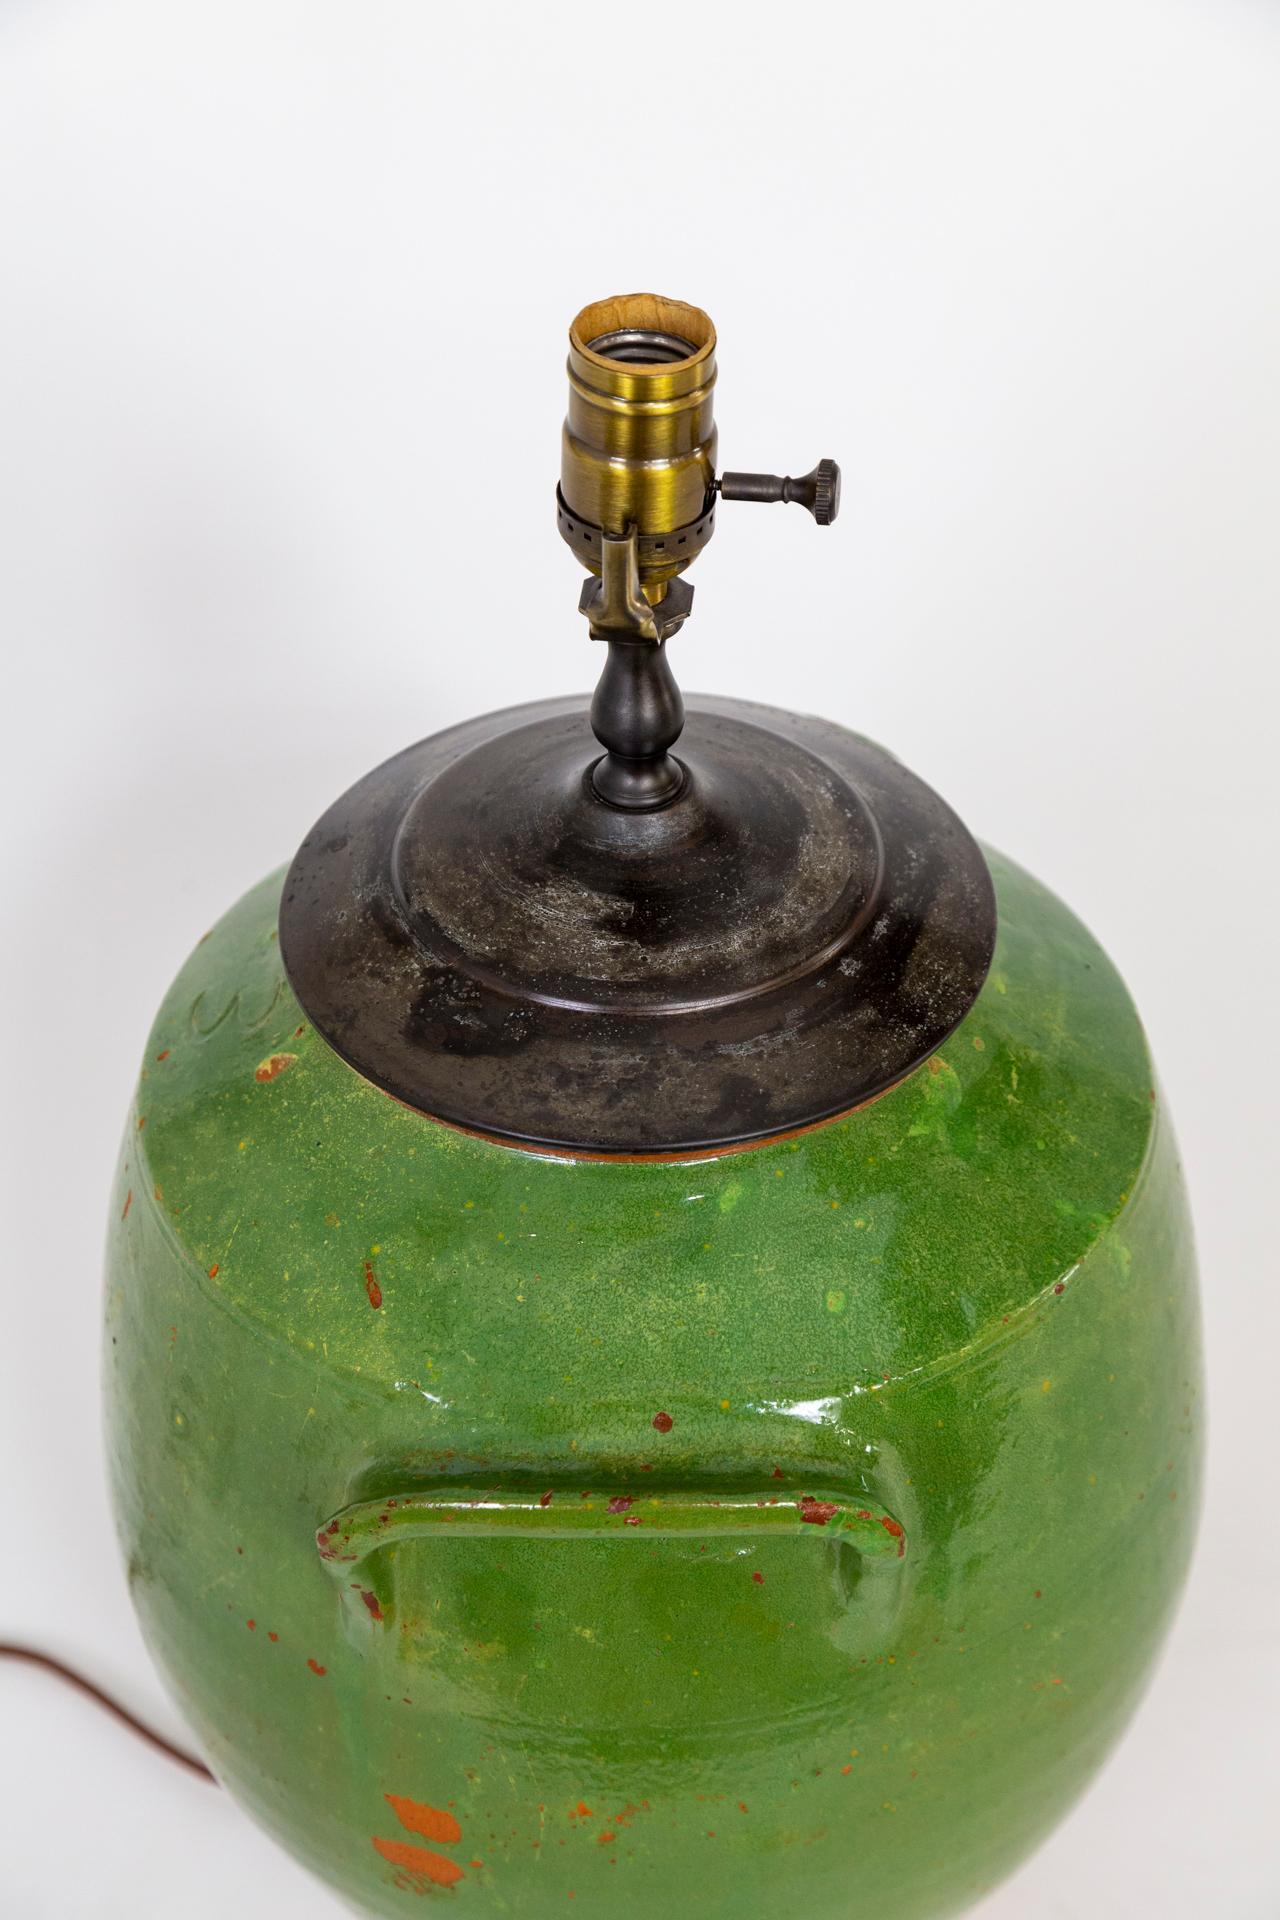 A French, green glazed, earthenware jar mounted as a table lamp. Beautiful, deep gray, speckled patina on bronze top cap, with a wood base matching the terra cotta at the bottom of the form. 3-way socket. 21” to top of socket x 12” width x 10” depth.